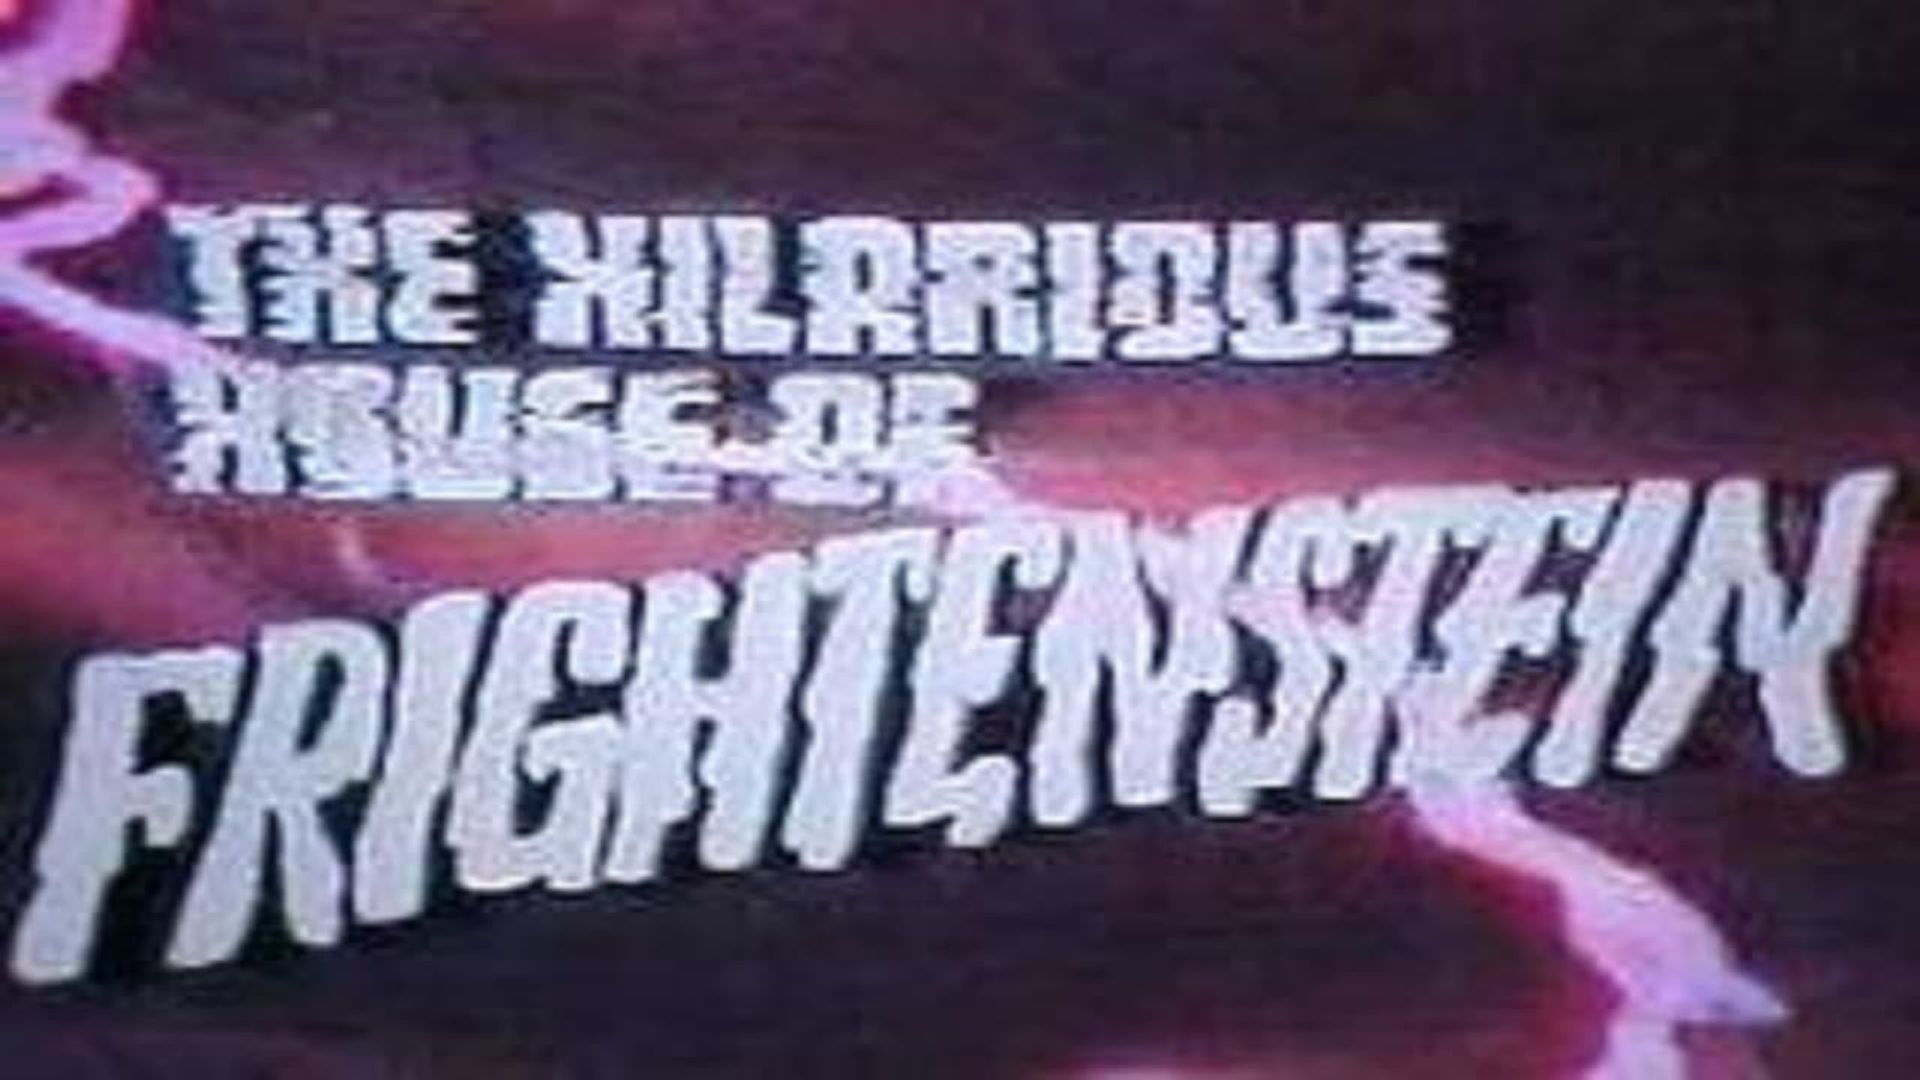 The Hilarious House of Frightenstein background